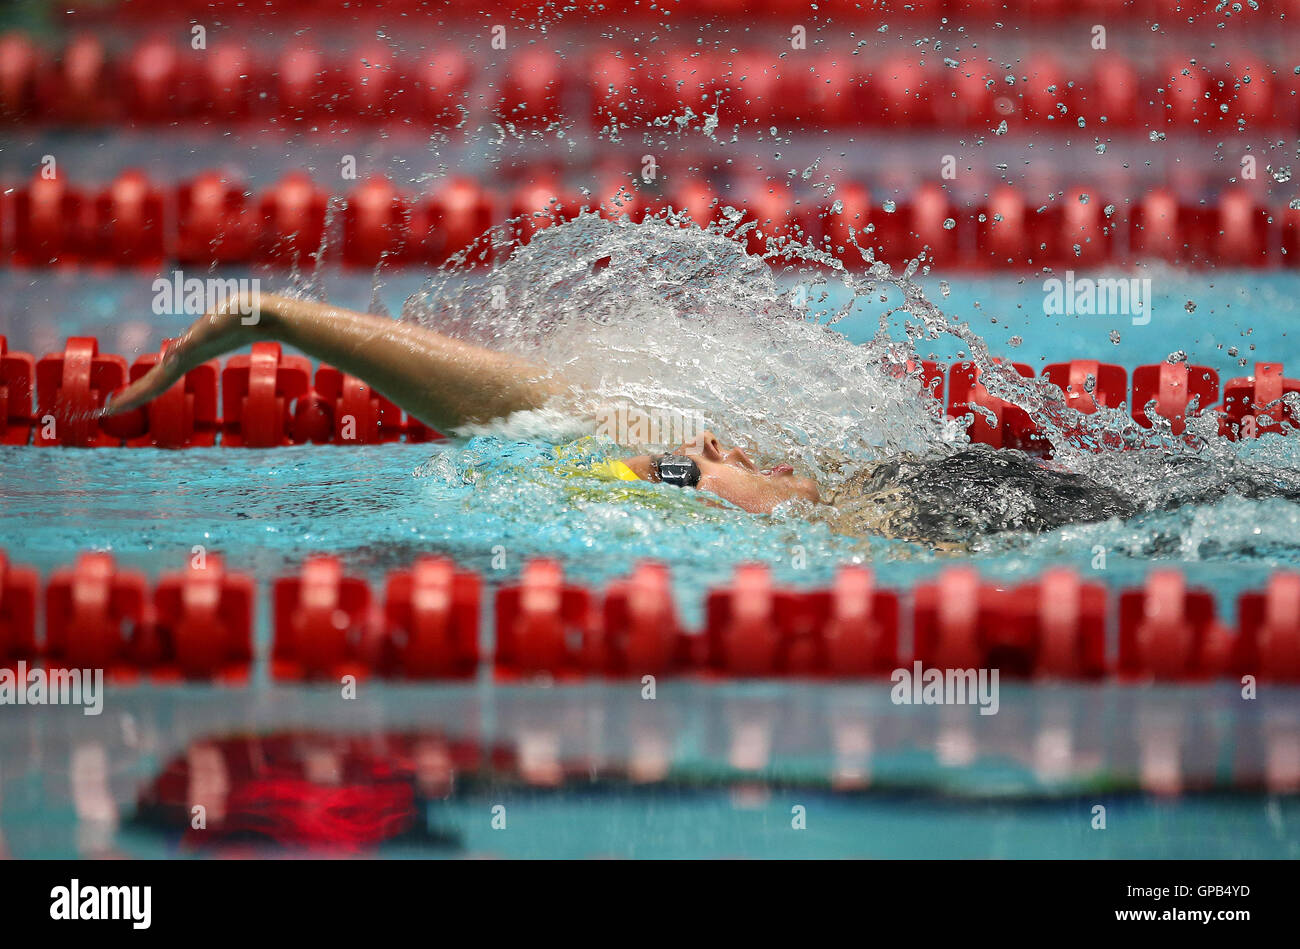 England Central's Megan Richter competes in the Women's Multi Classification 100m Backstroke during day three of the 2016 School Games at Loughborough University, Loughborough. PRESS ASSOCIATION Photo. Picture date: Saturday September 3, 2016. Photo credit should read: Steven Paston/PA Wire Stock Photo